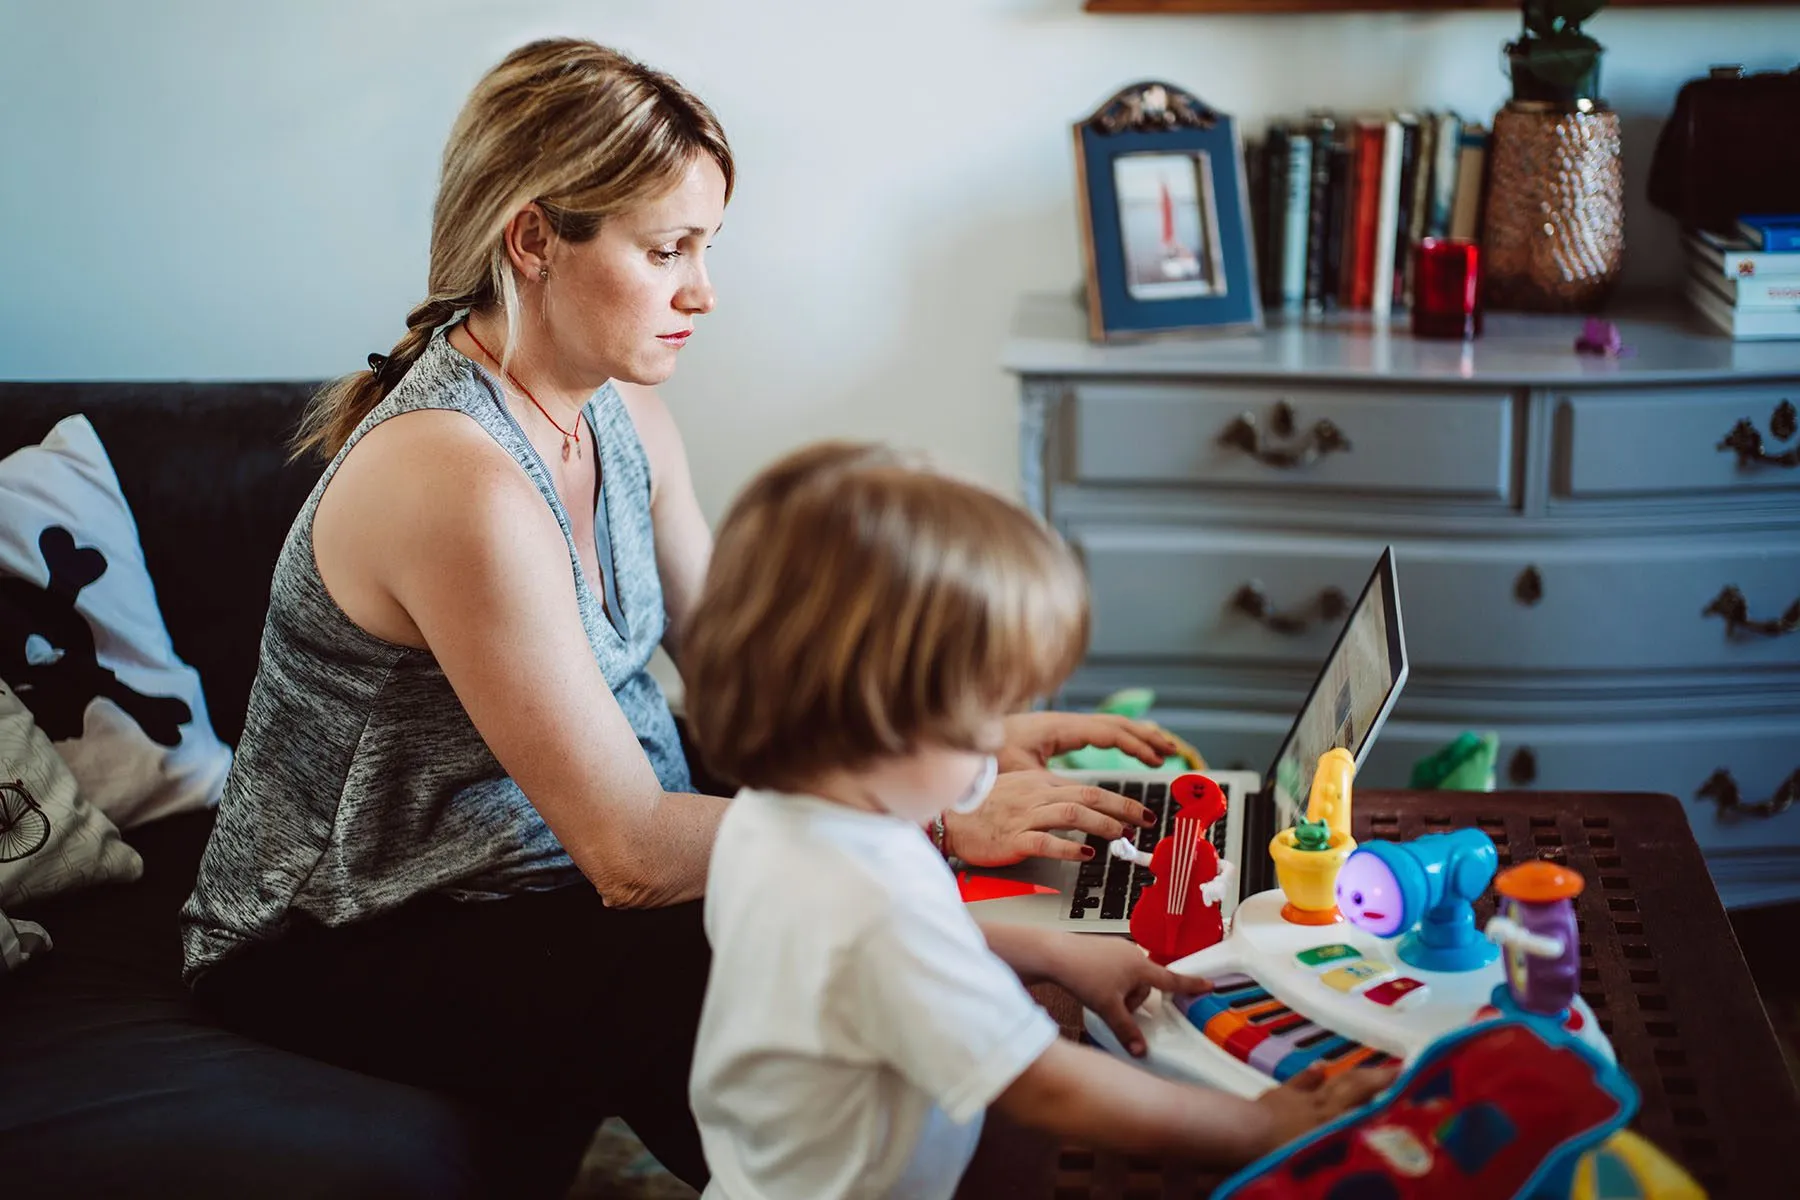 Woman working from home while her son plays next to her.